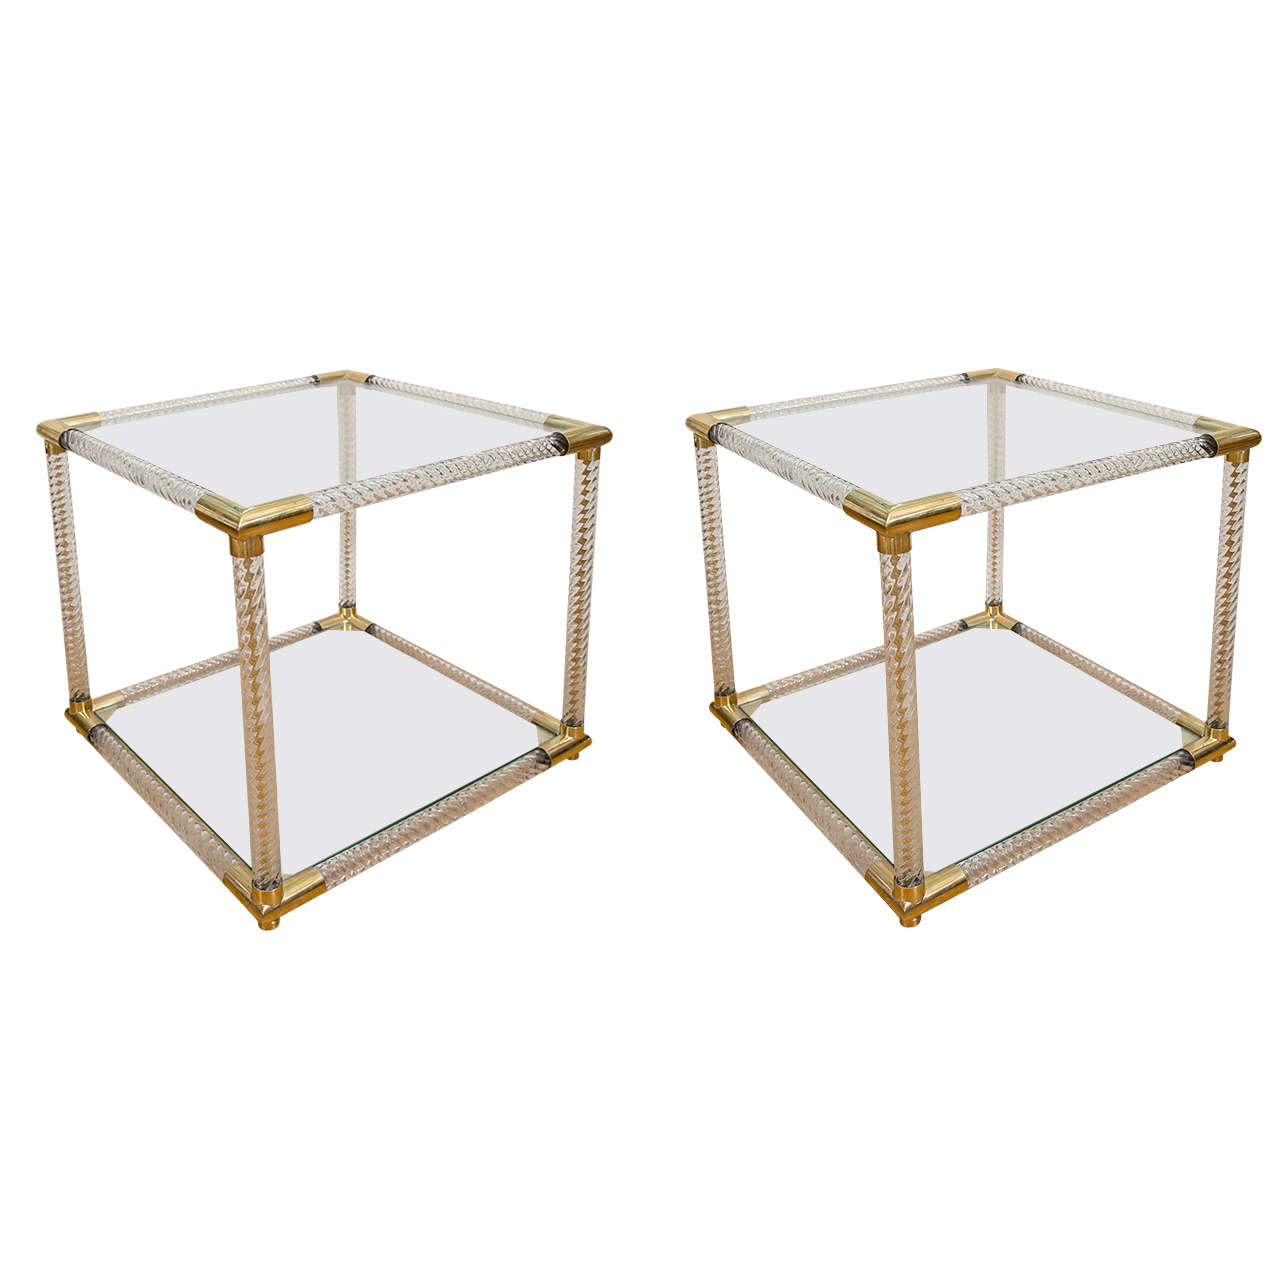 Pair of Two-Tier Fluted Glass Side Tables